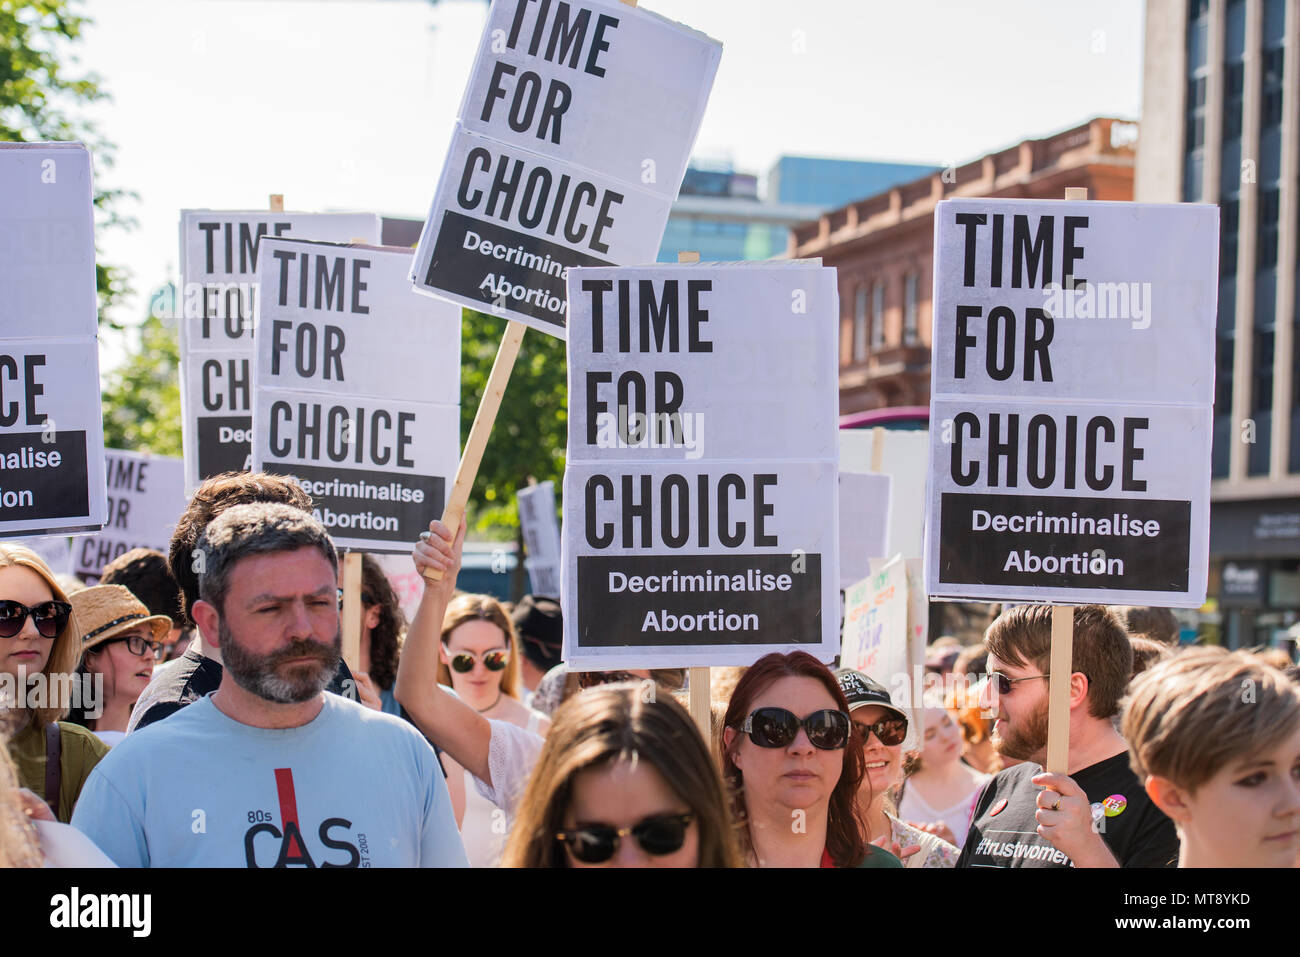 Belfast, Northern Ireland. 28/05/2018 - Around 500 people gather at Belfast City Hall to call for the decriminalisation of abortion in Northern Ireland.  It comes the day after a referendum held in the Republic of Ireland returned a substantial 'Yes' to removing the 8th amendment to the constitution, which gives equal right of life to both the mother and baby, effectively banning abortion in all circumstances. Stock Photo